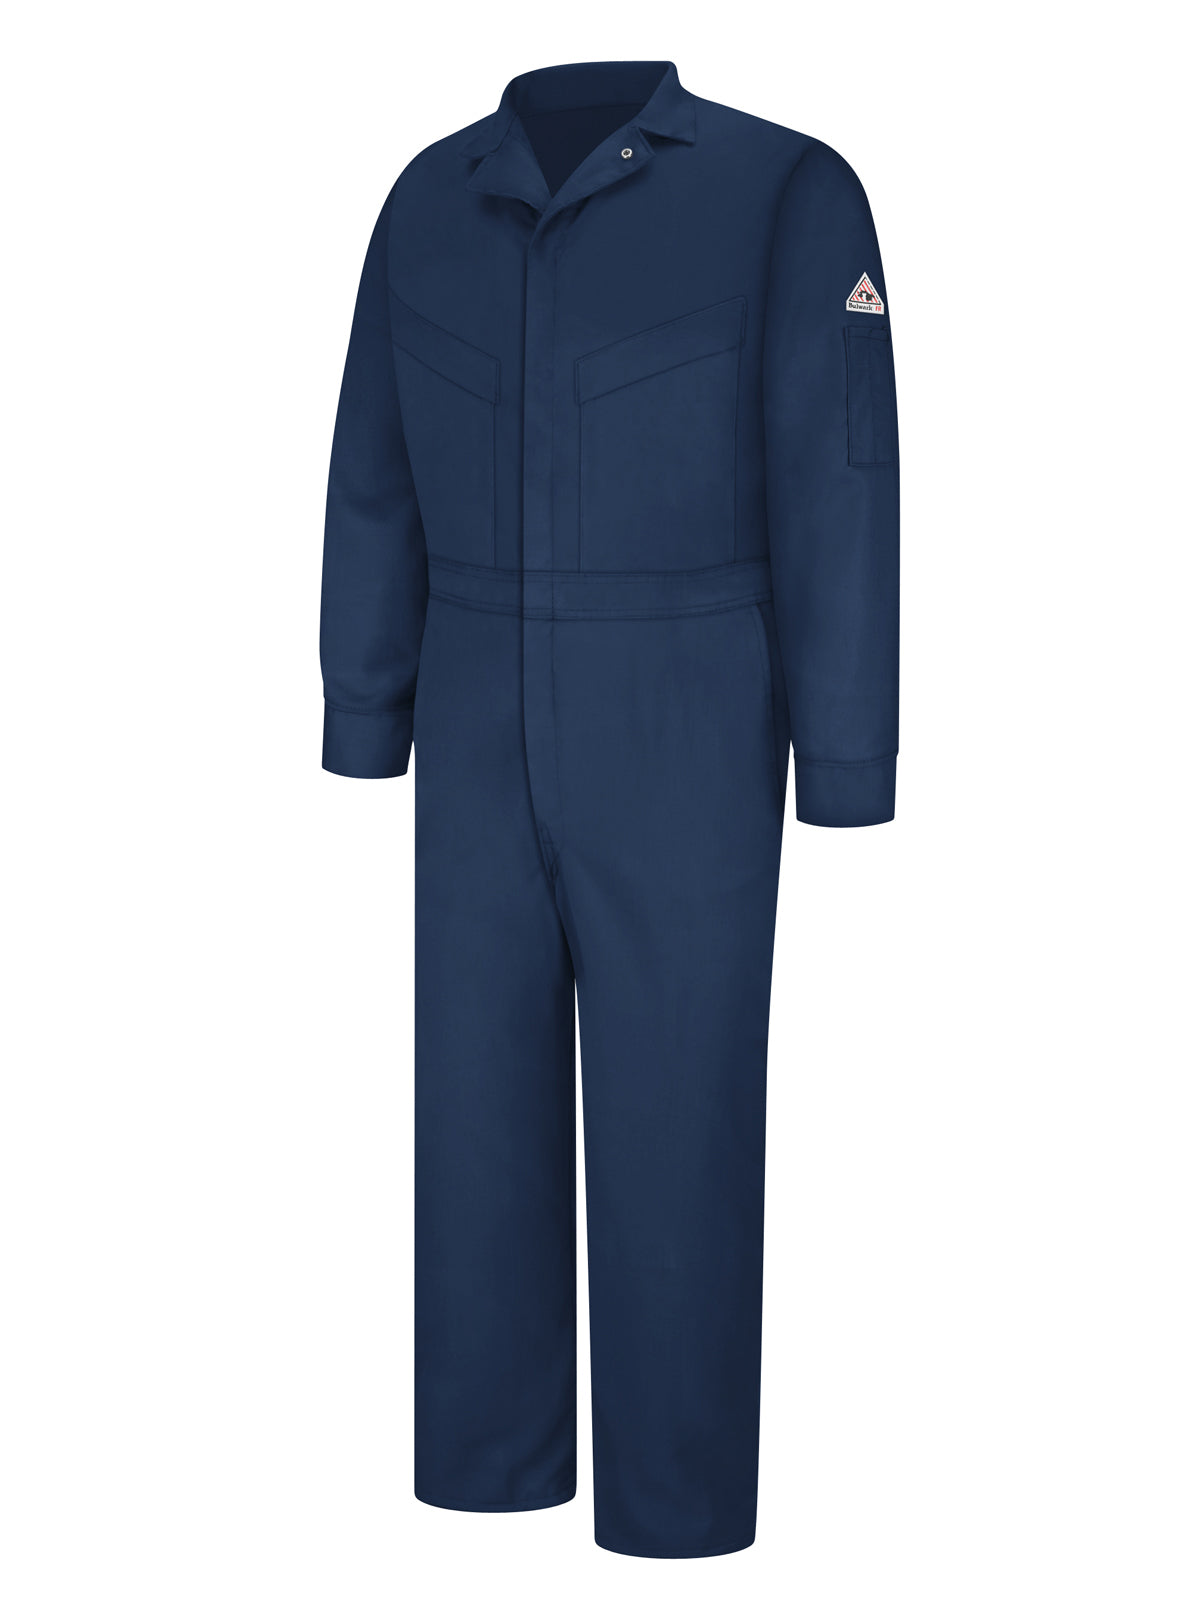 Men's Lightweight Excel Flame-Resistant Deluxe Coverall - CLD4 - Navy